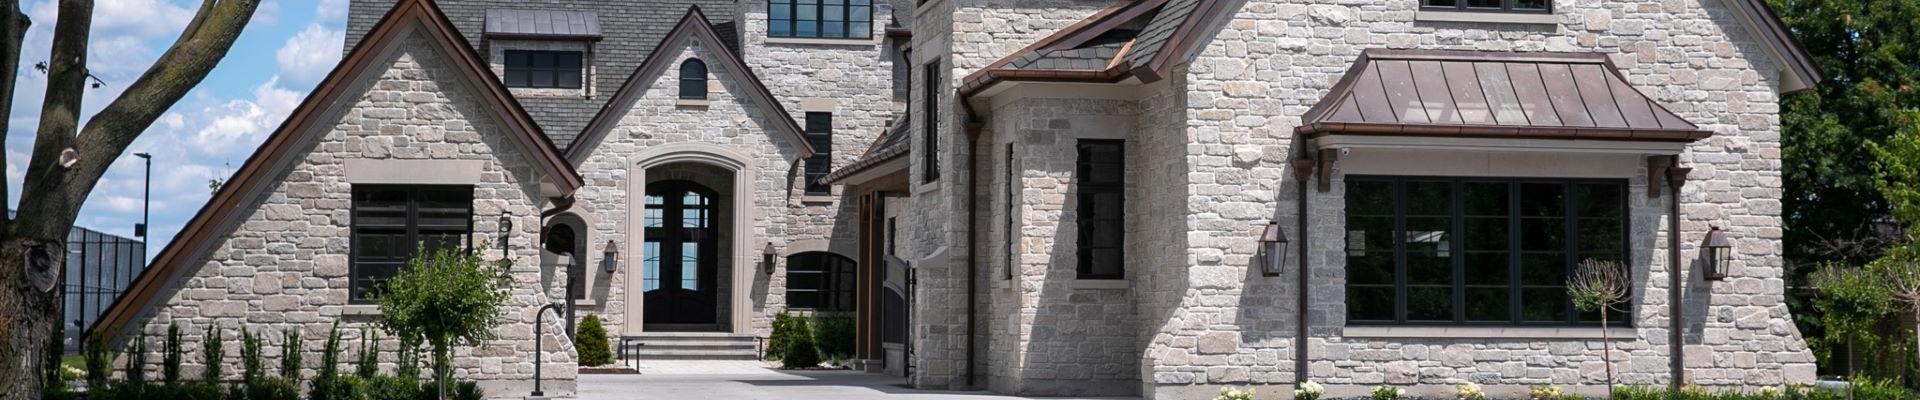 Exterior of home with limestone and brick finish